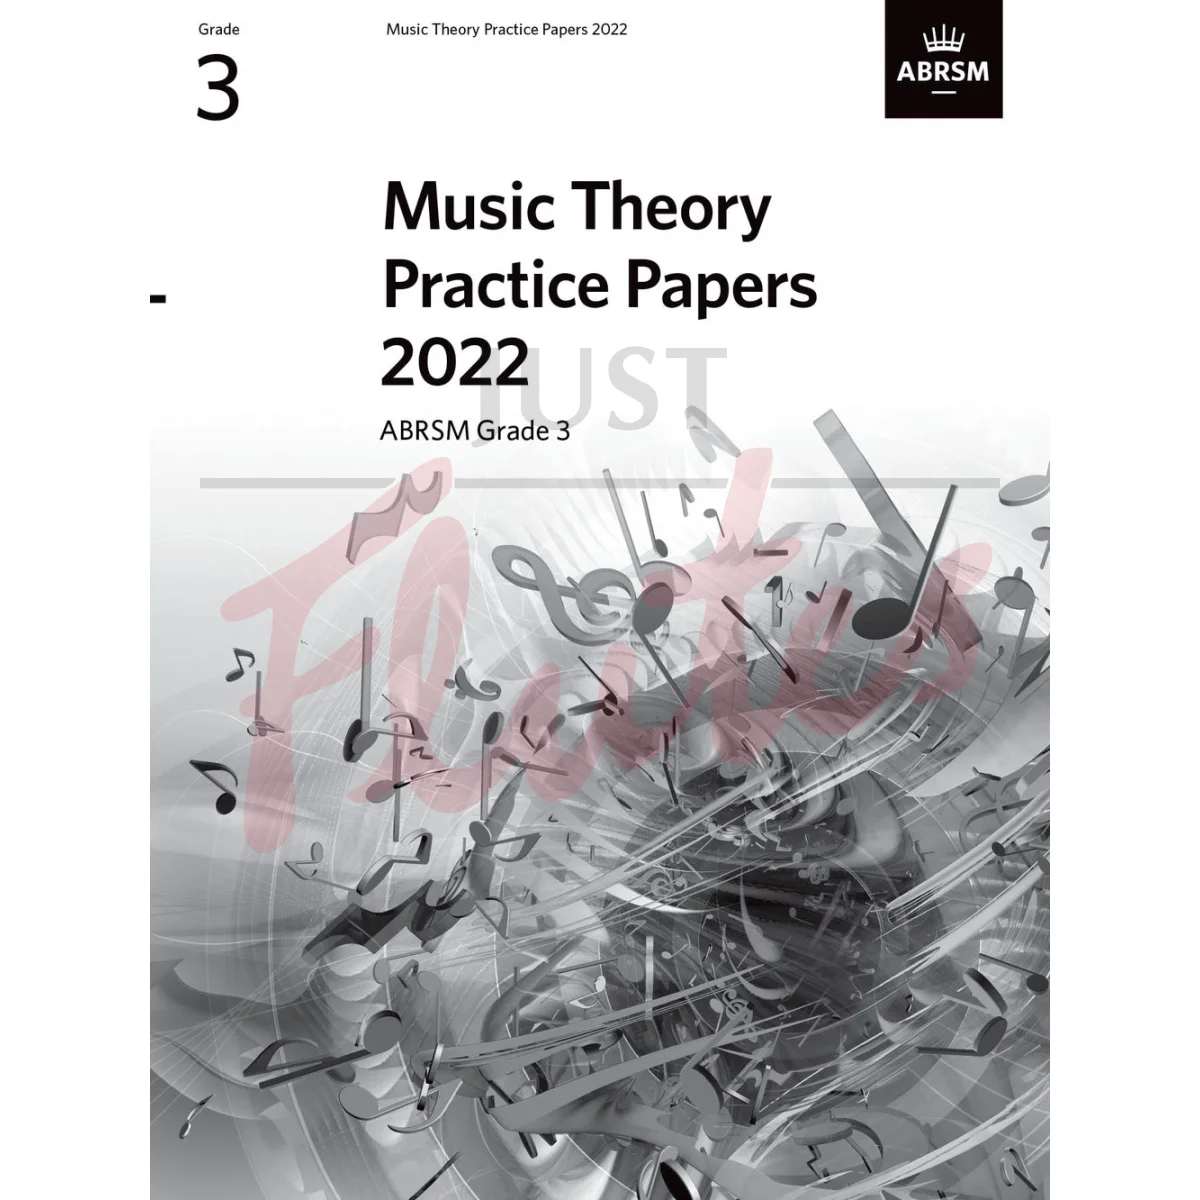 Music Theory Practice Papers 2022 Grade 3